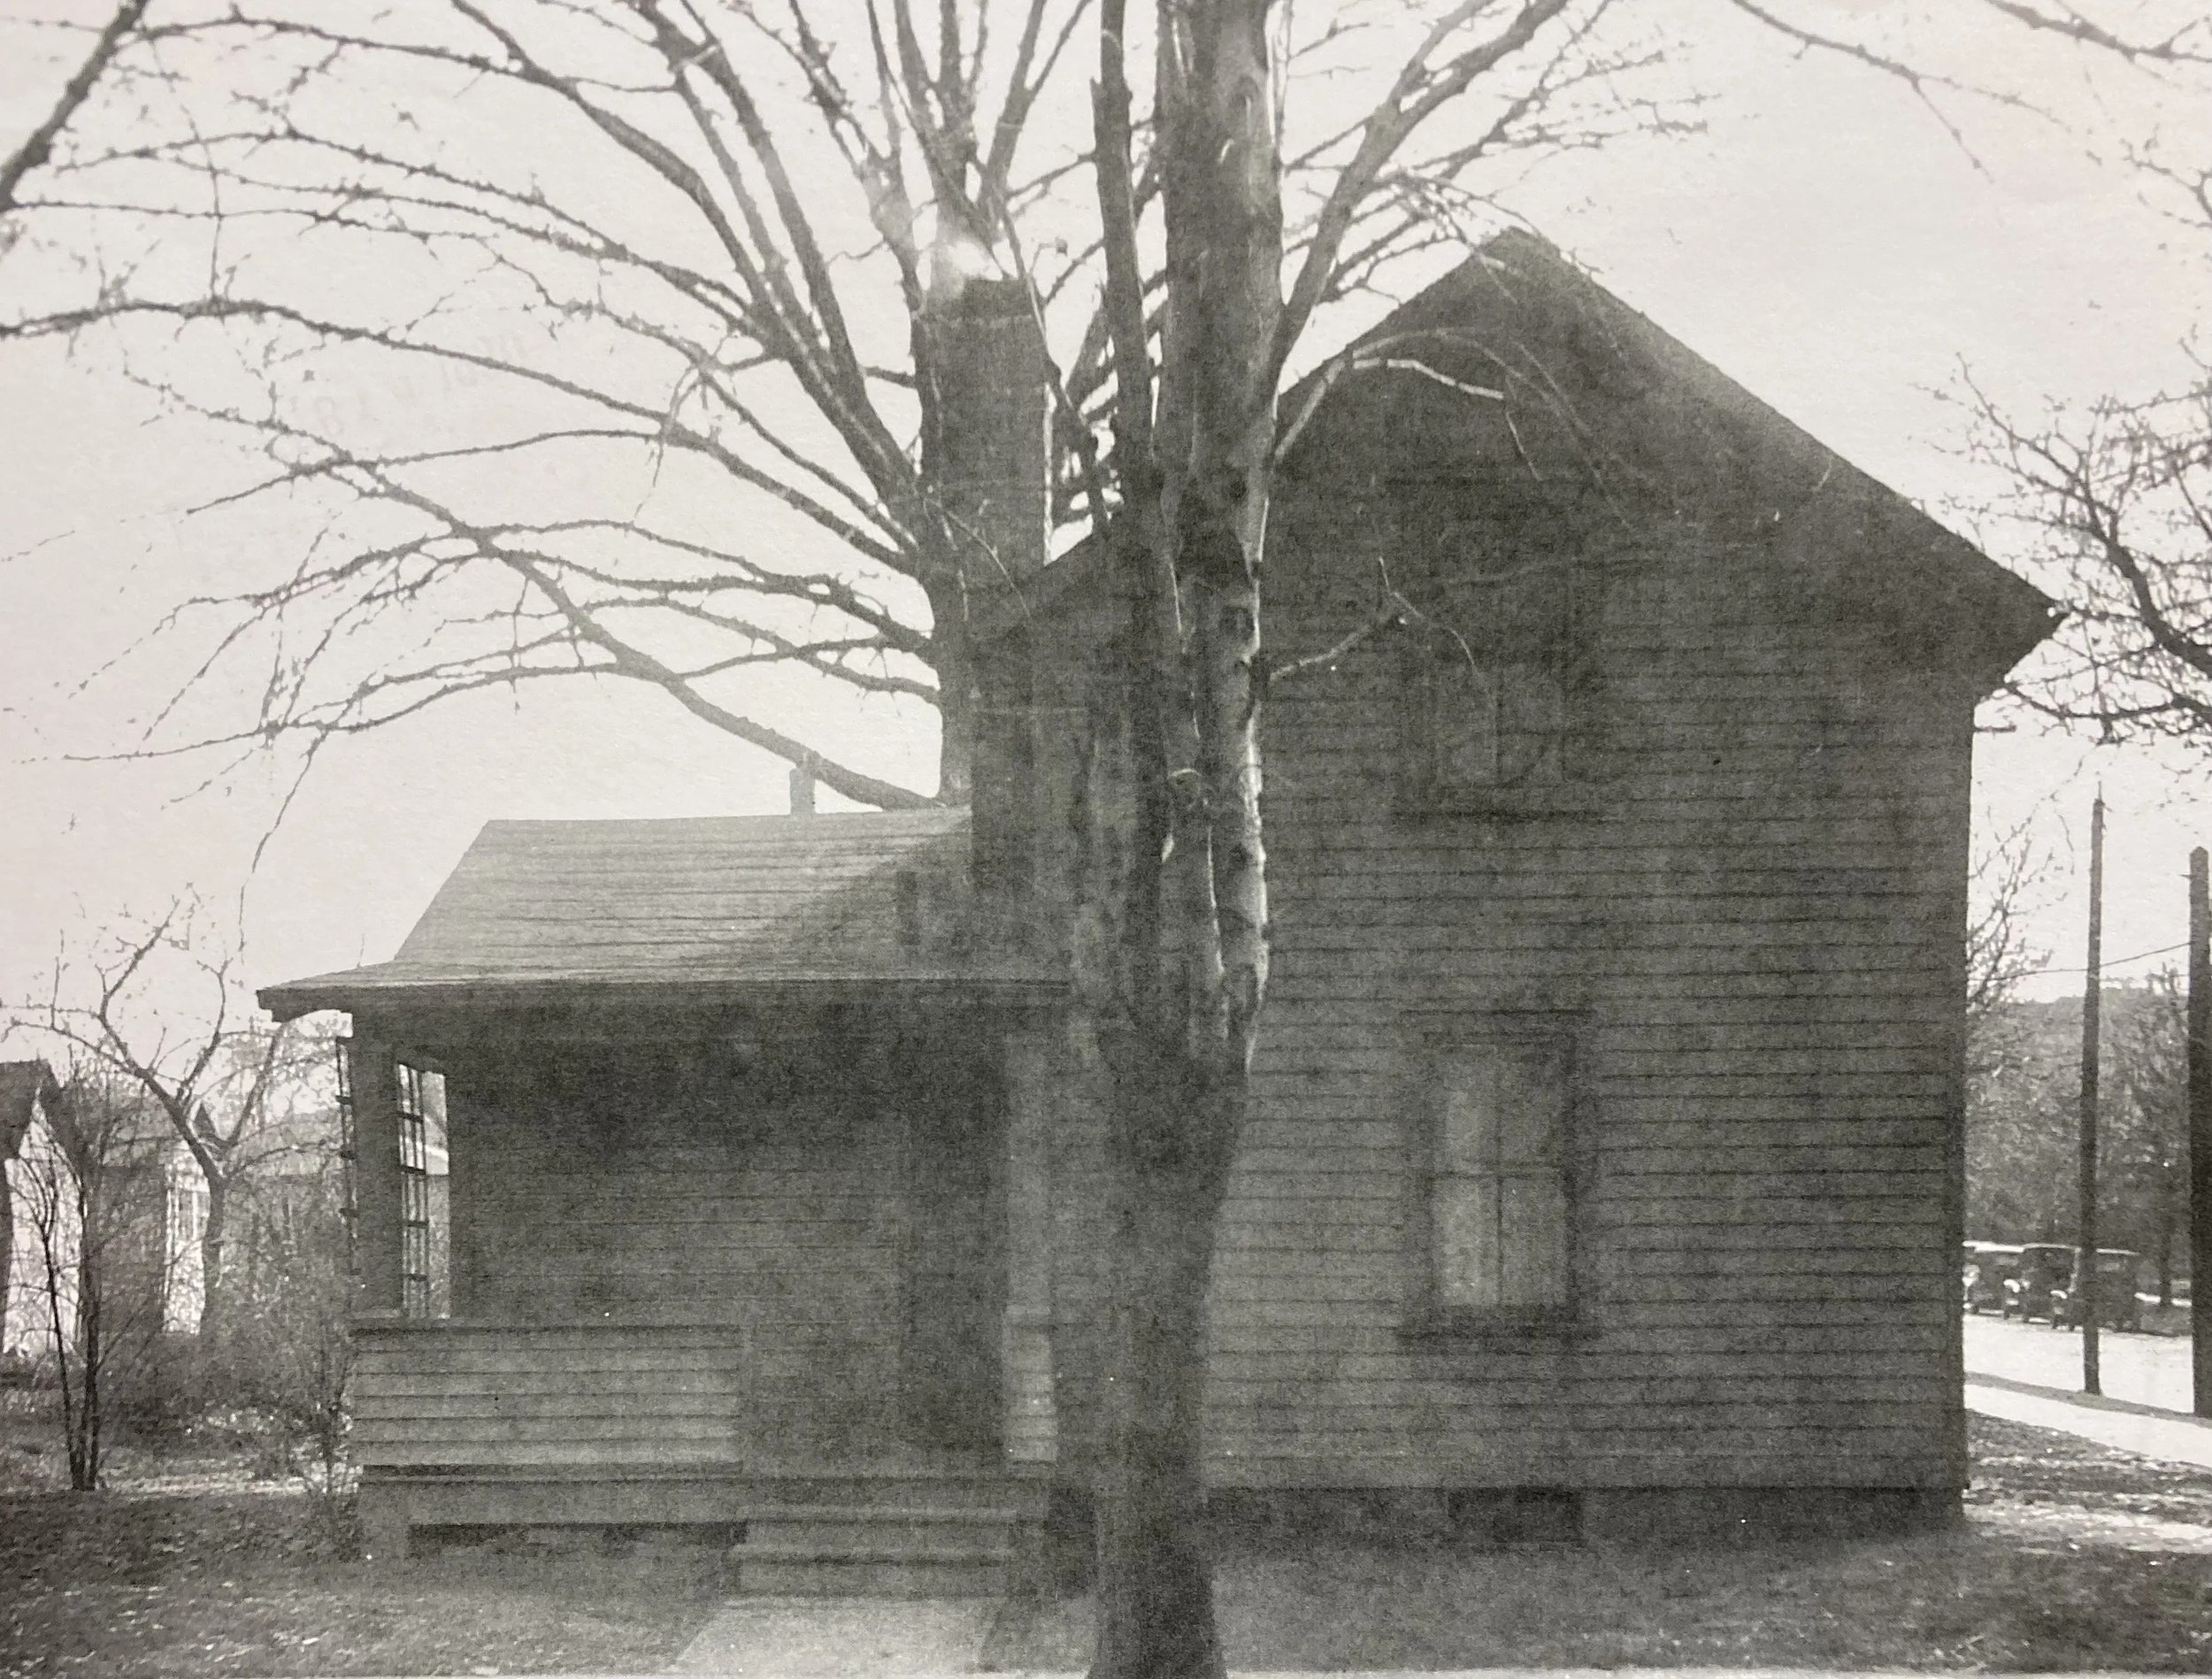 The Horst home in 1928